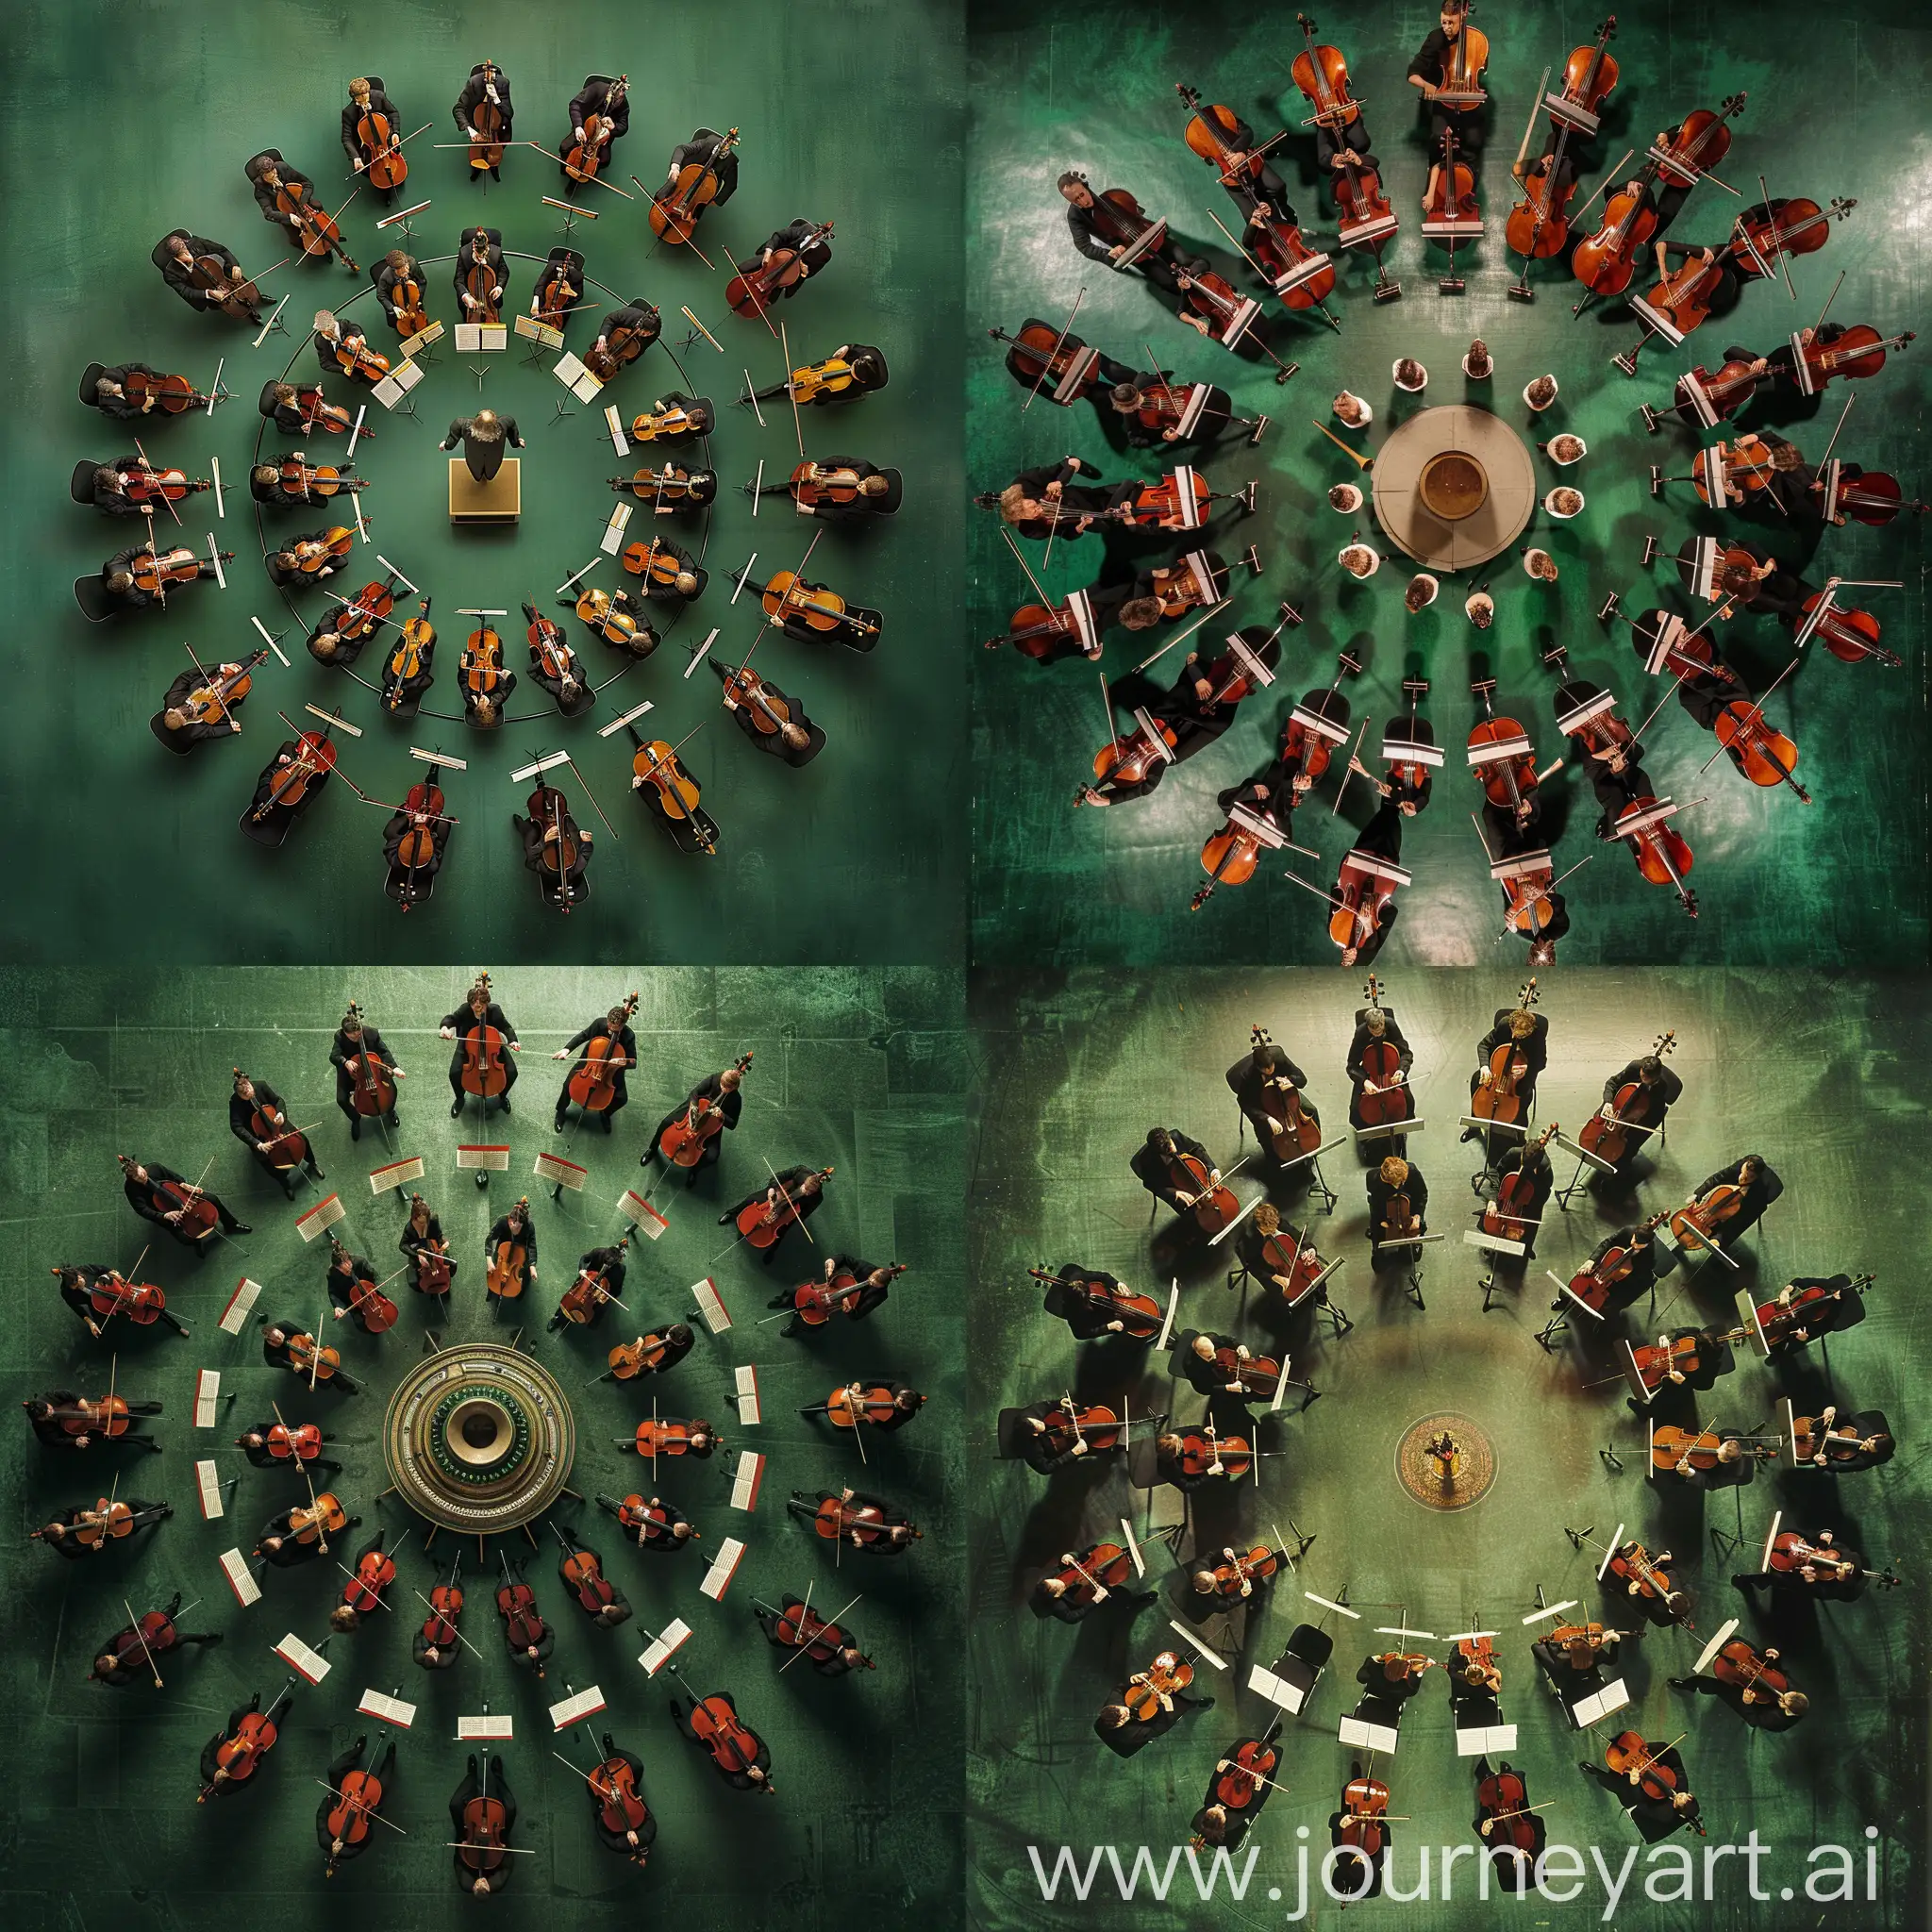 Give me an overhead view of an orchestra photographed at a 70 degree angle to the floor and seated in a circle around a center with a green background.